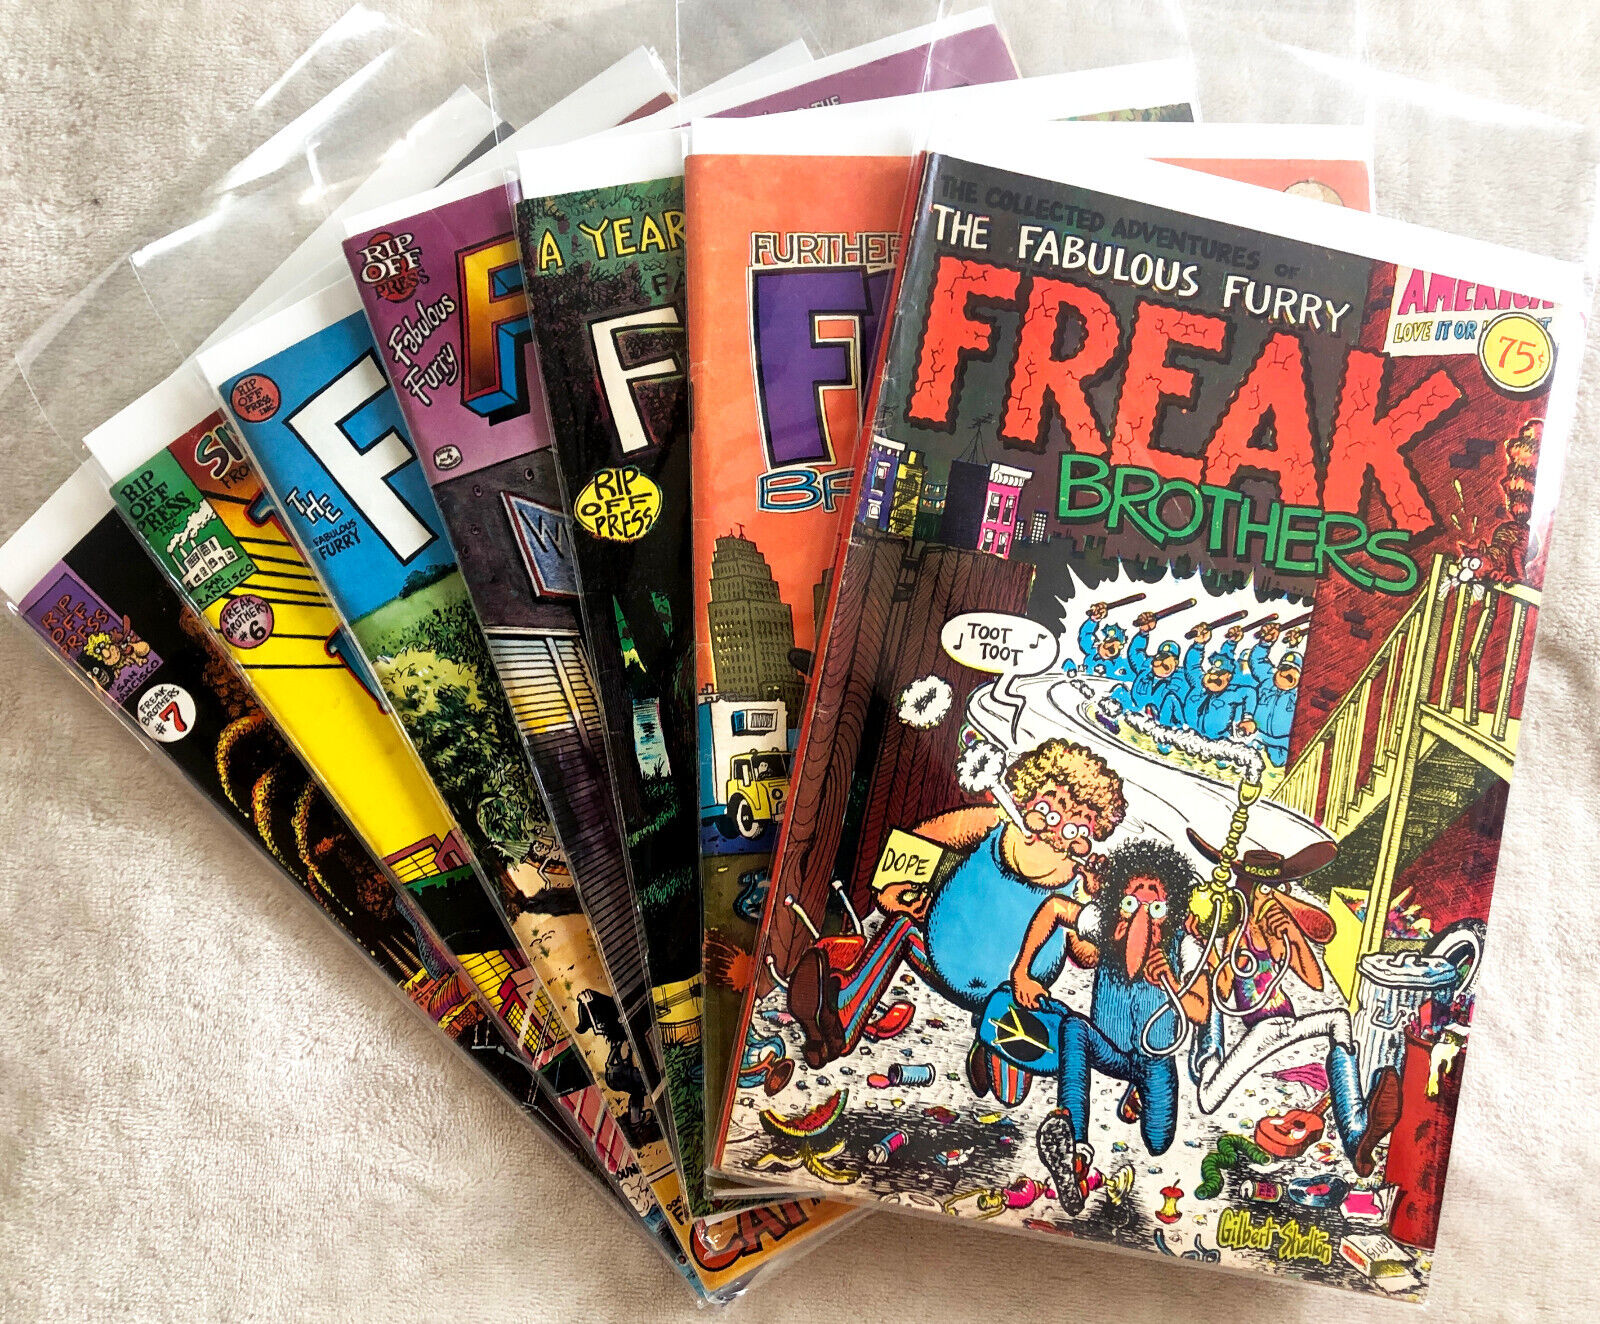 Fabulous Furry Freak Brothers #1 #2 #3 #4 #5 #6 #7 Seven Issue Discount Run